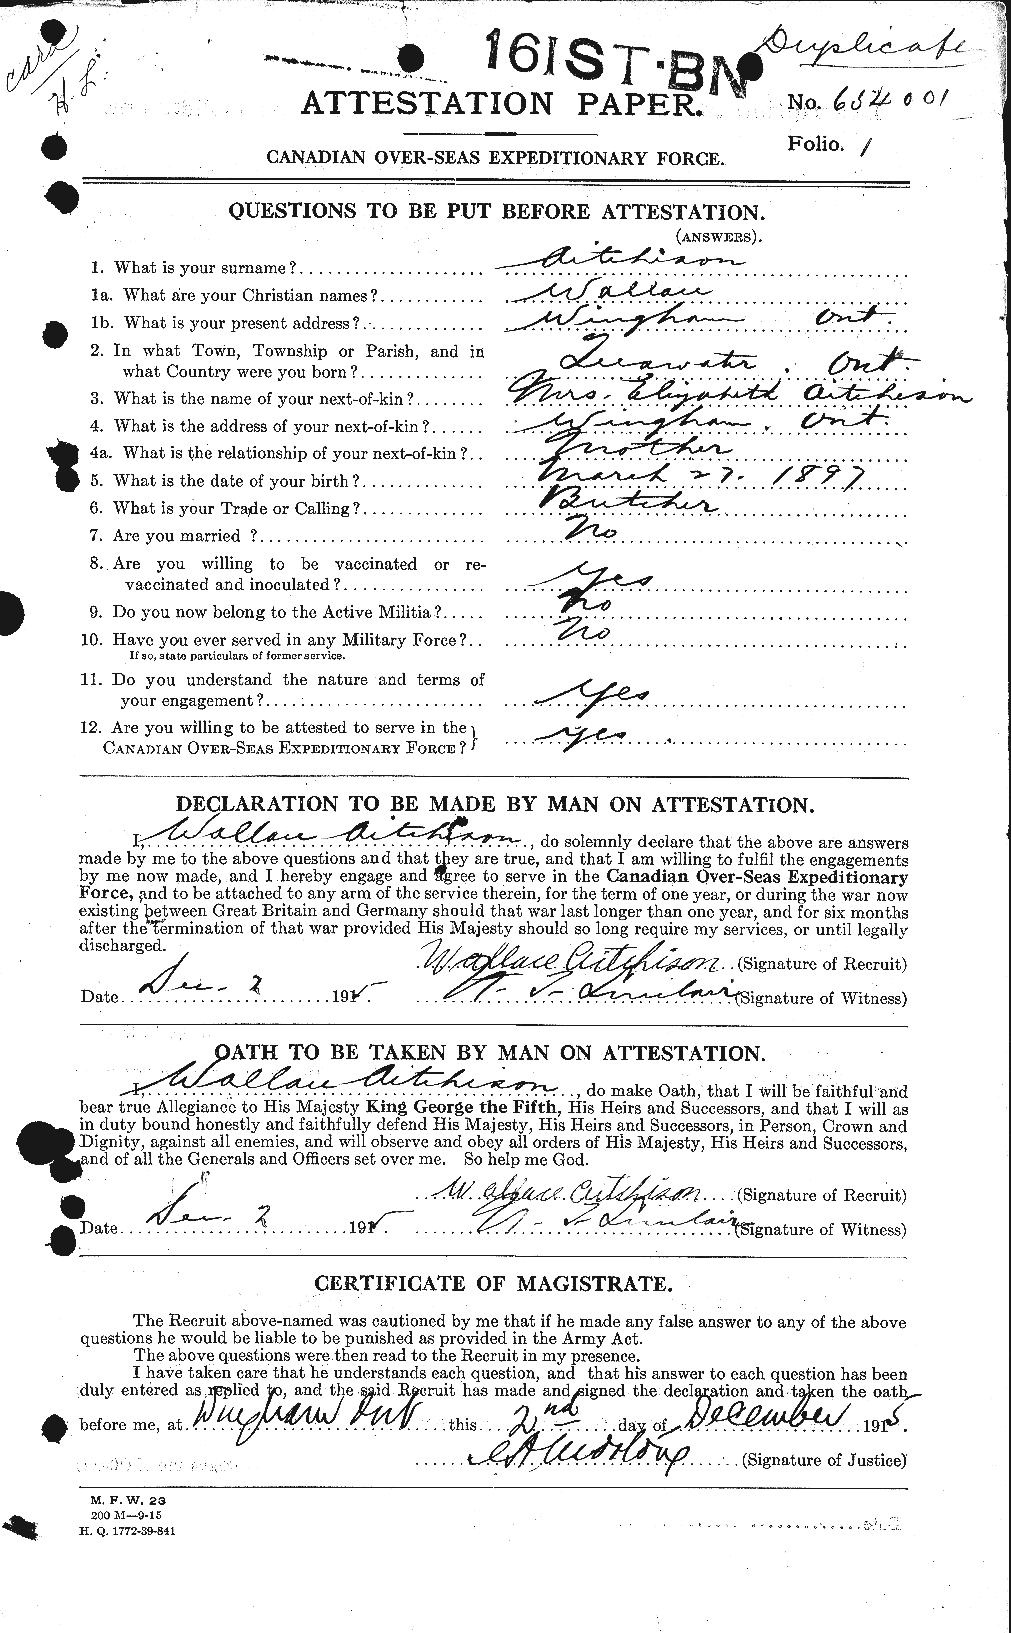 Personnel Records of the First World War - CEF 203318a